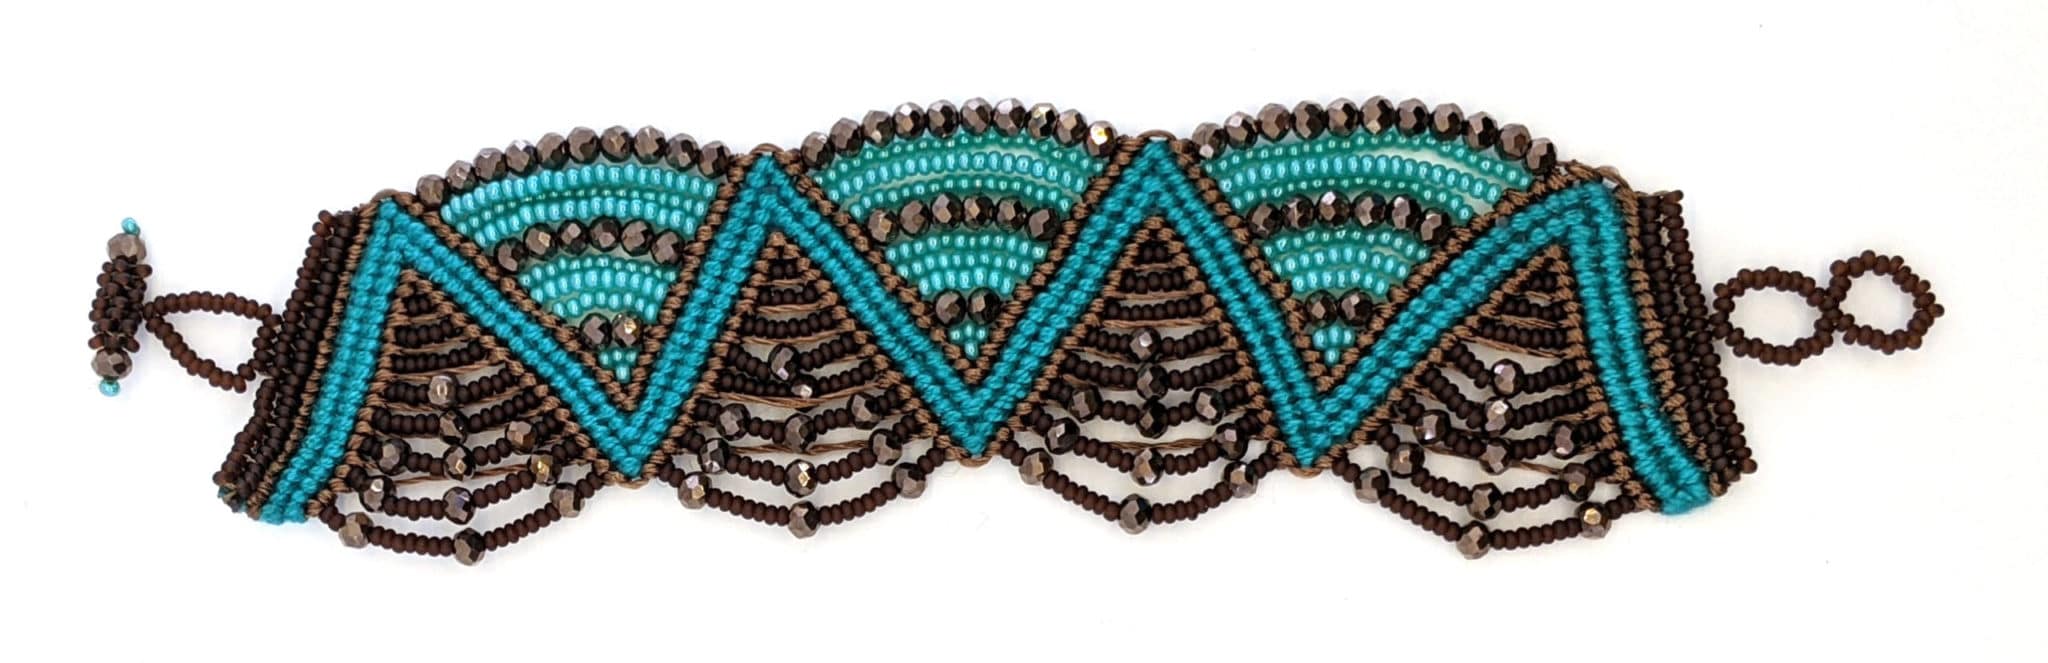 Turquoise and Bronze Winding River Macrame, Crystals and Beads Bracelet